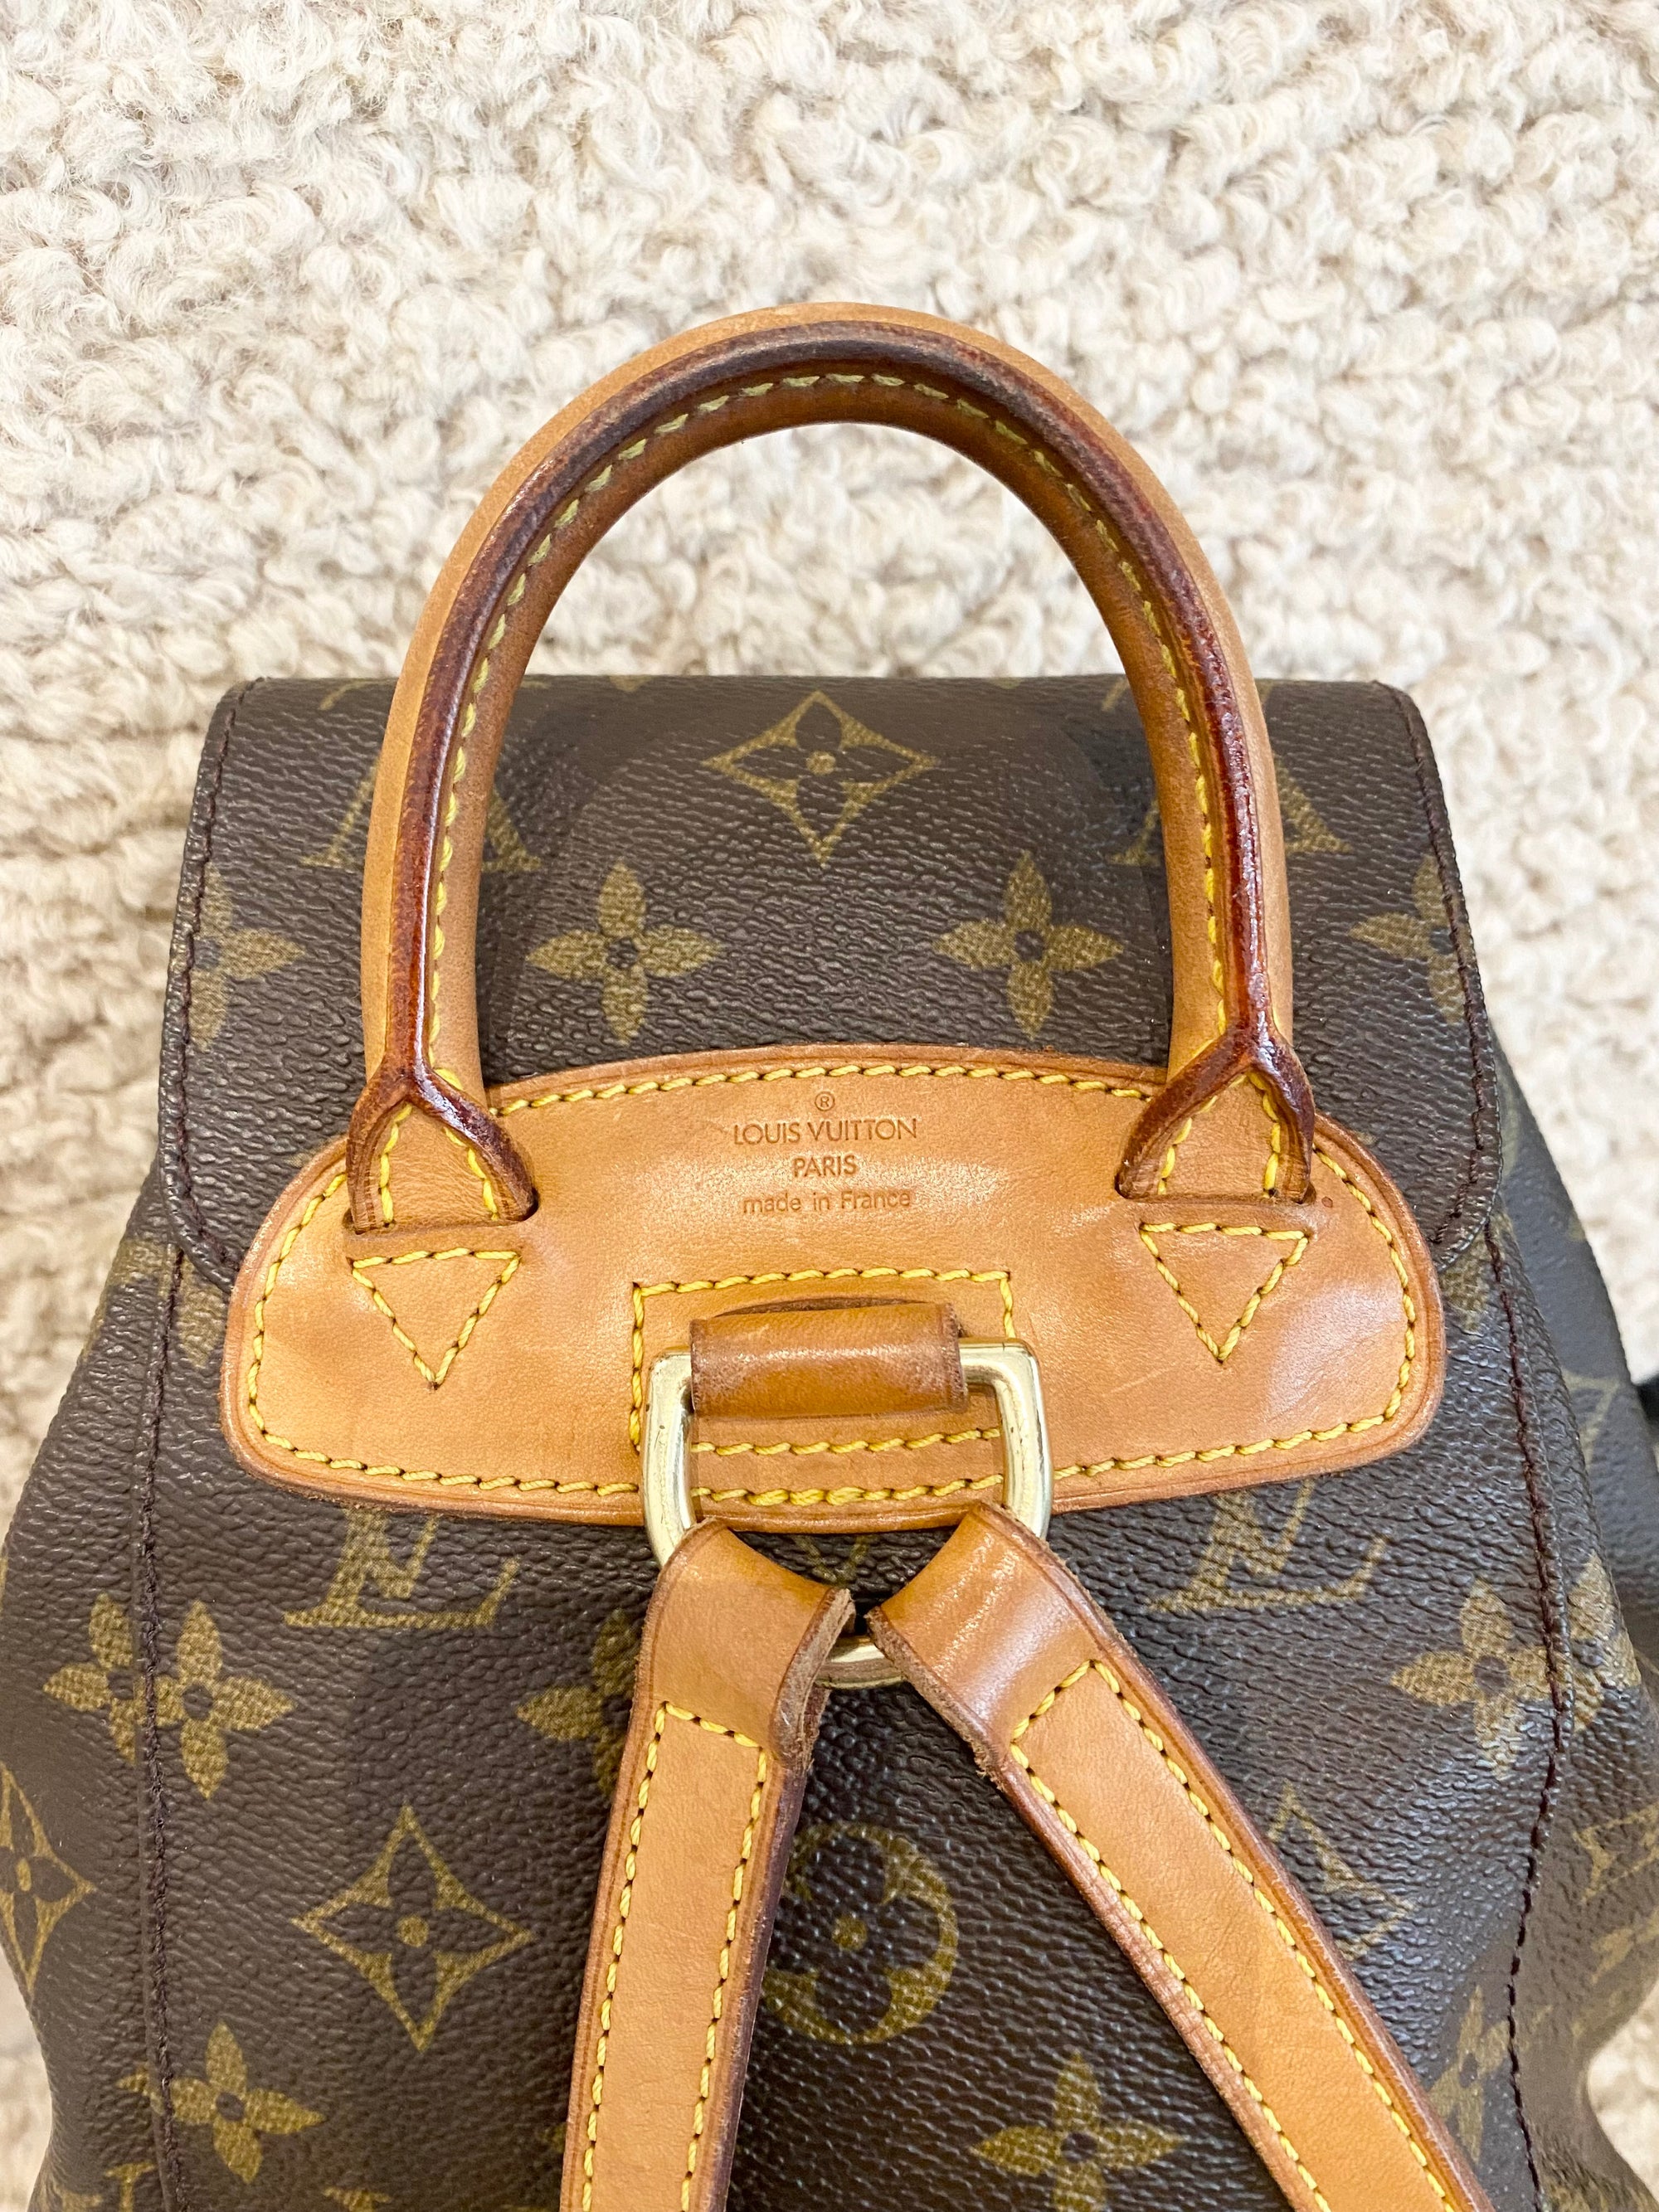 Louis Vuitton Montsouris Backpack - The Recollective